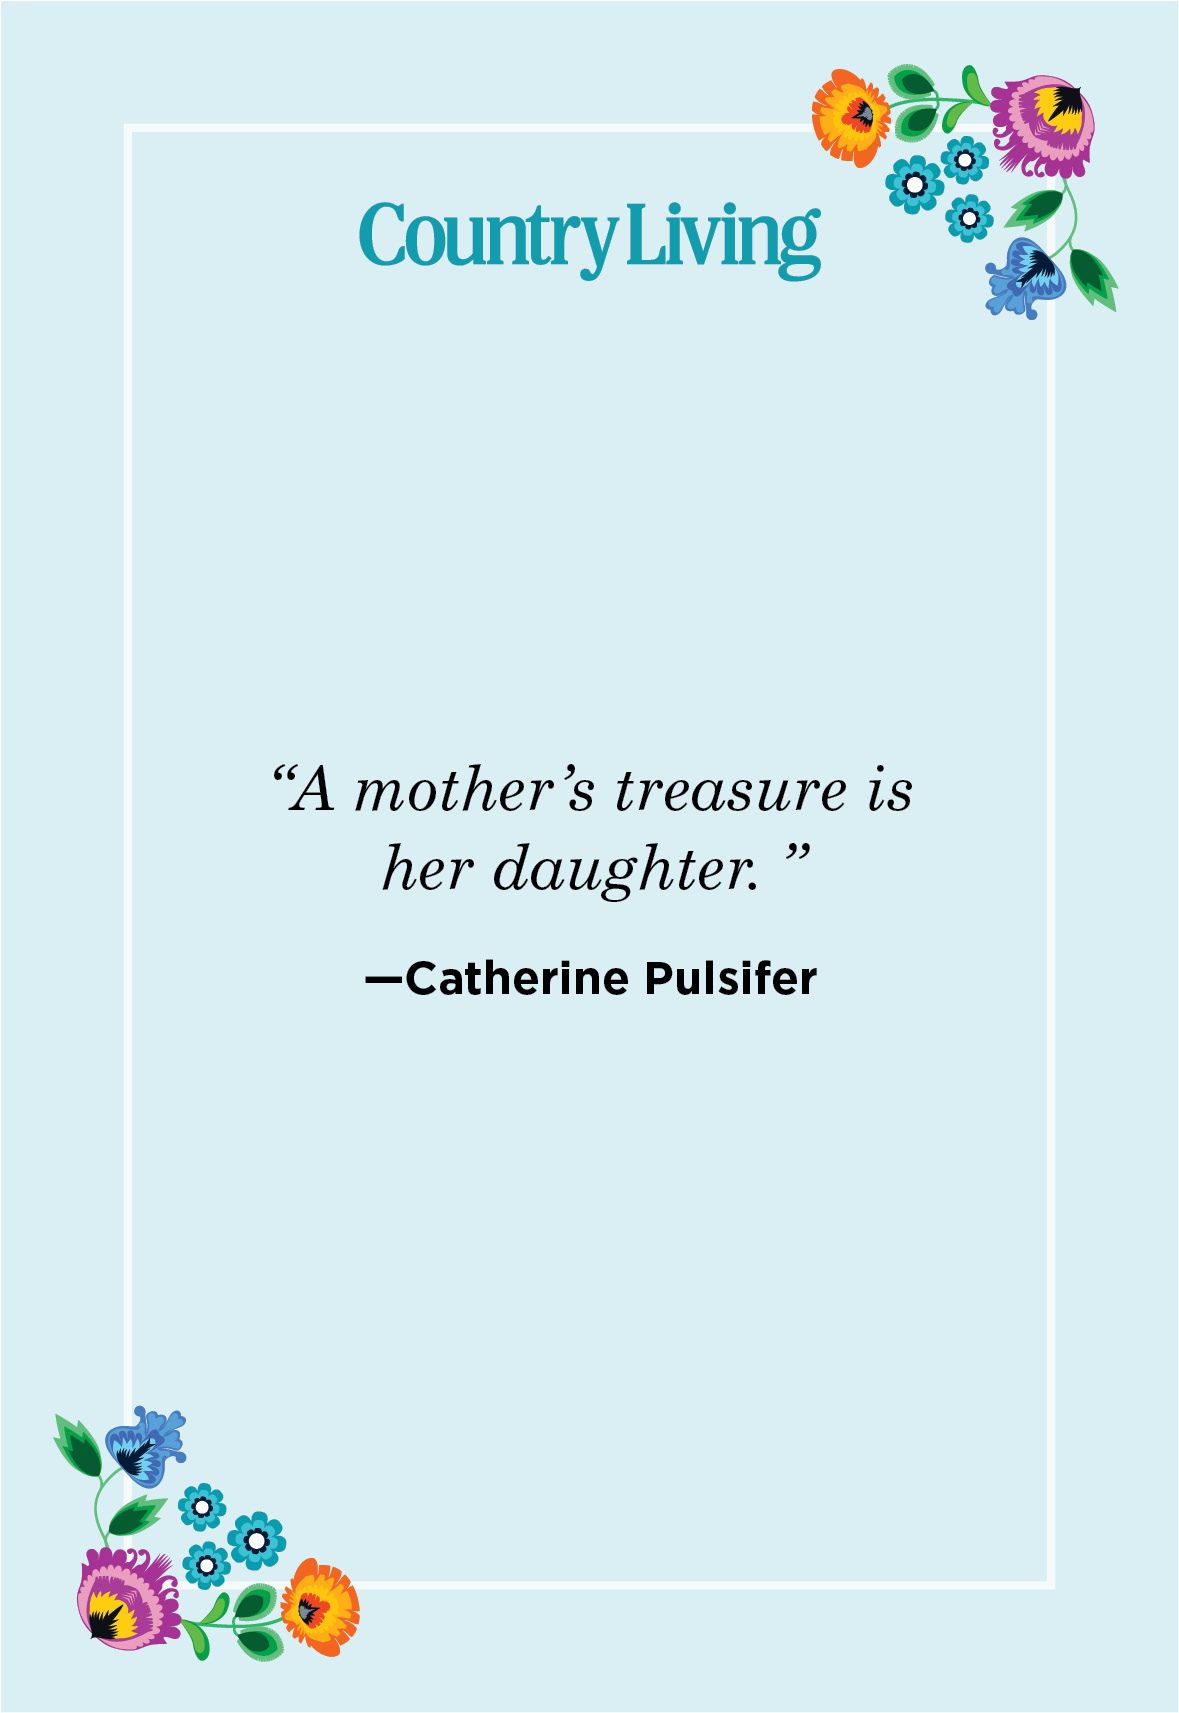 mothers and daughters quotes